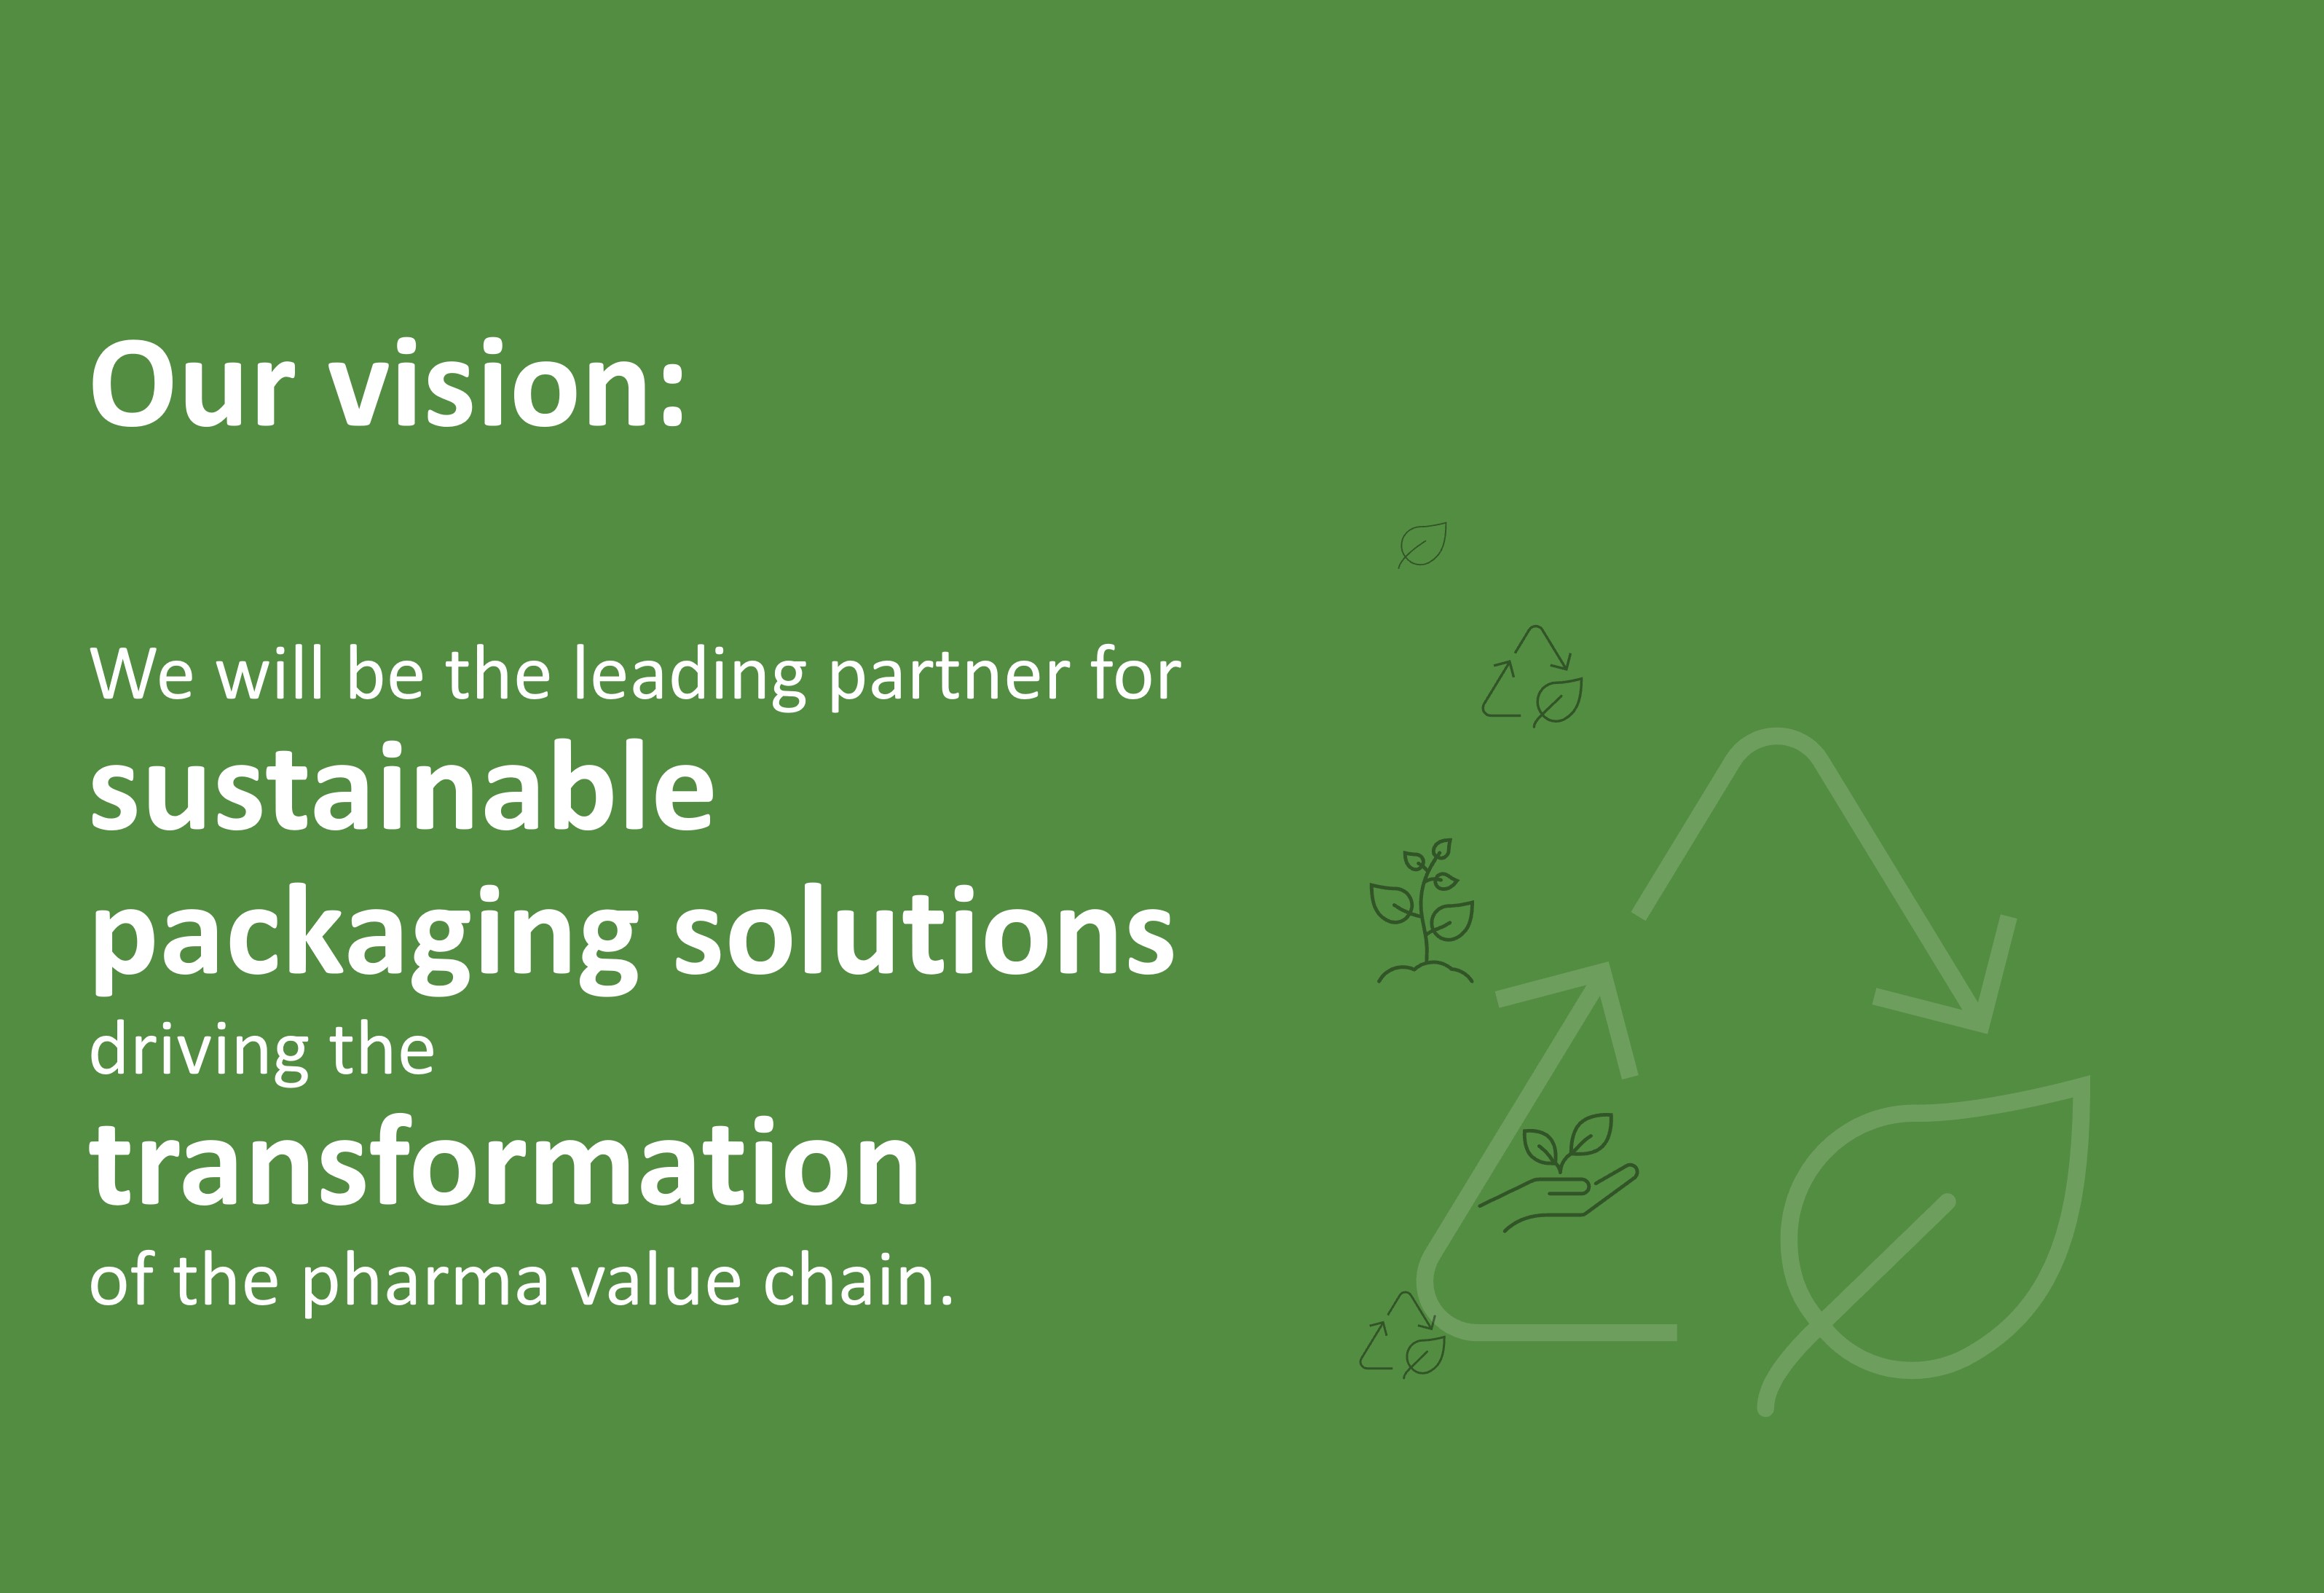 We will be the leading partner for sustainable packaging solutions driving the transformation of the pharma value chain 